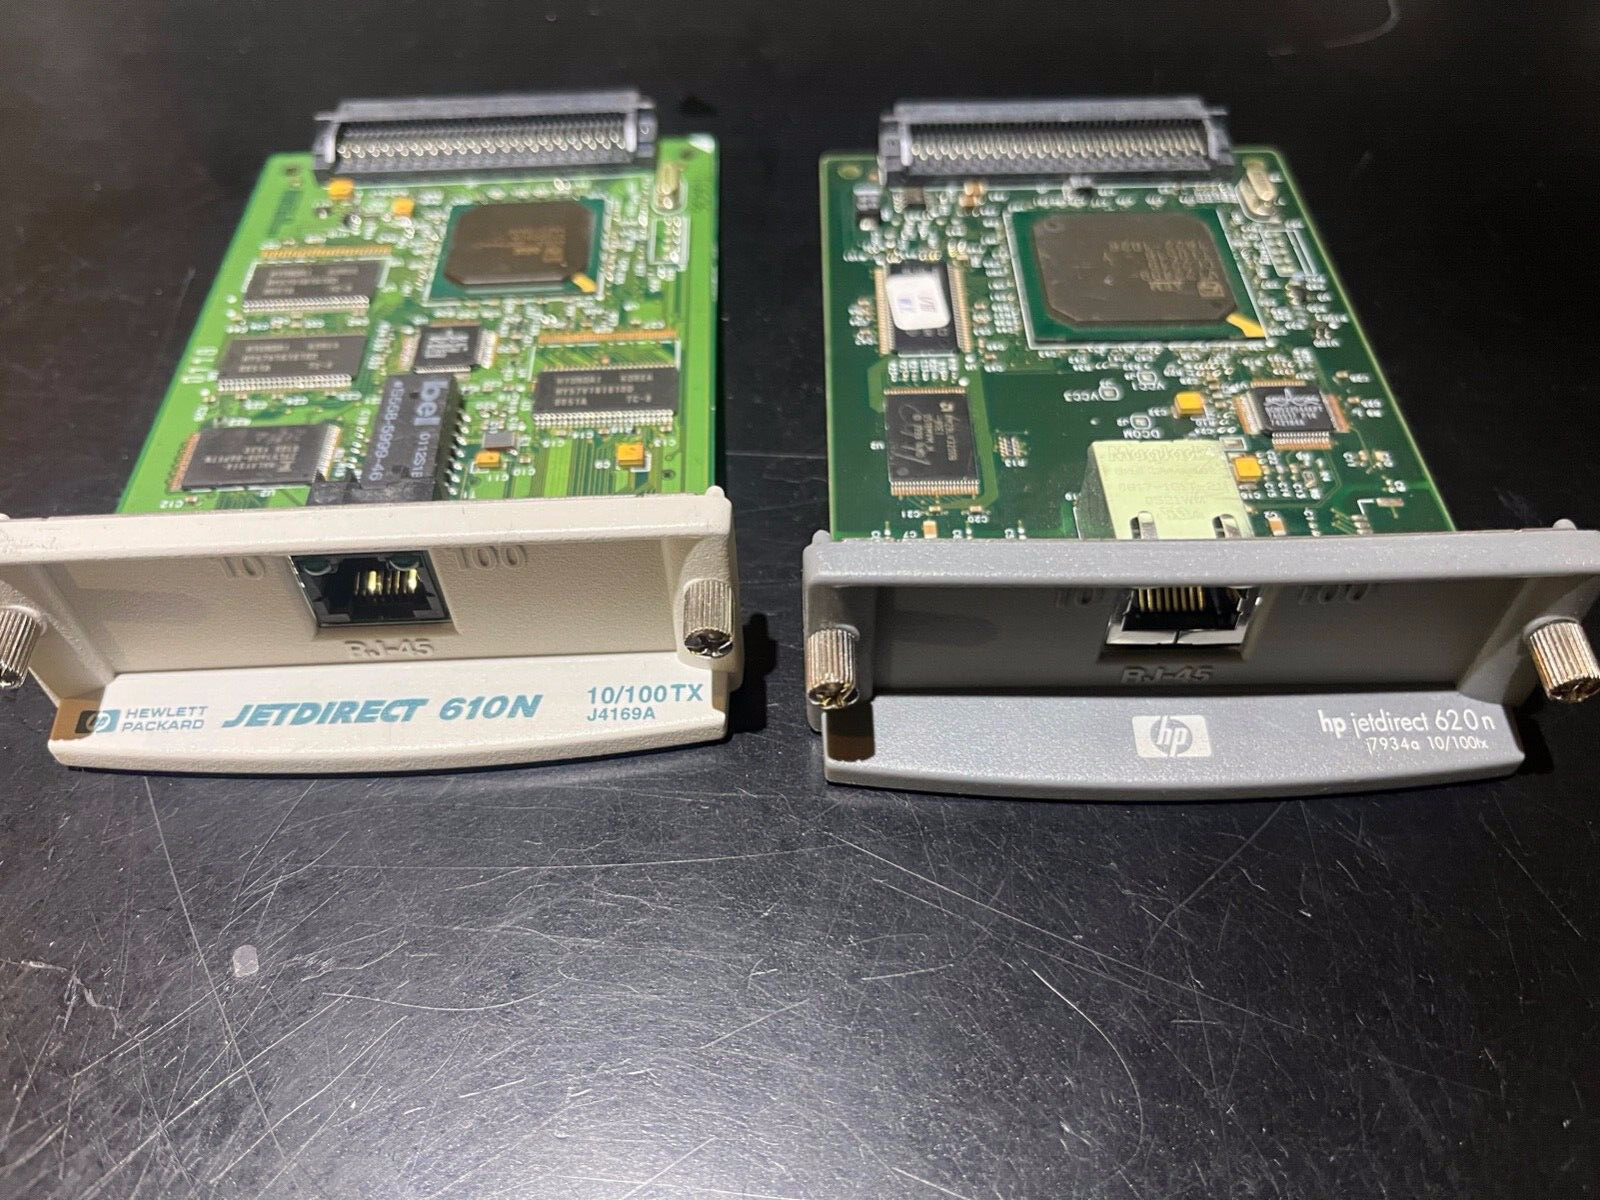 Lot of 2, HP JetDirect 610N (J4169A) & HP JetDirect 620n (j7934a) As-Is, Read